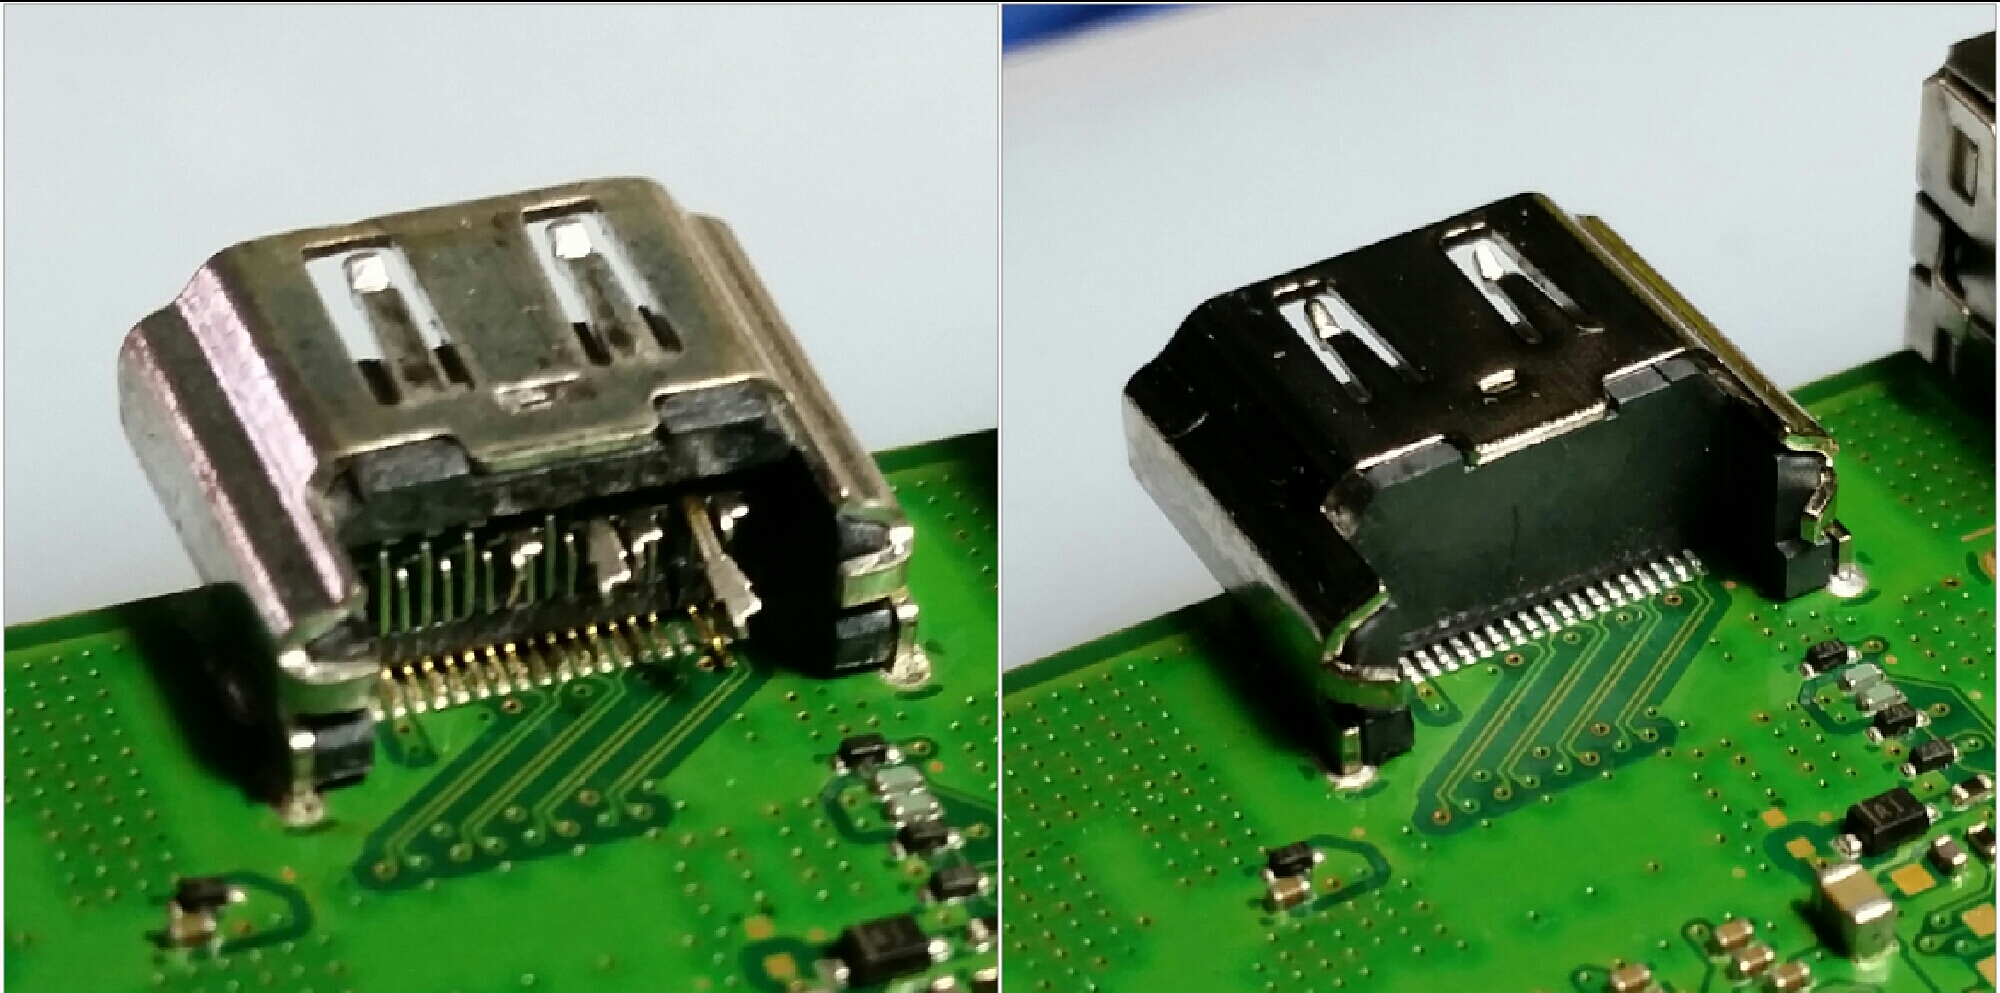 Corrosion around display connector